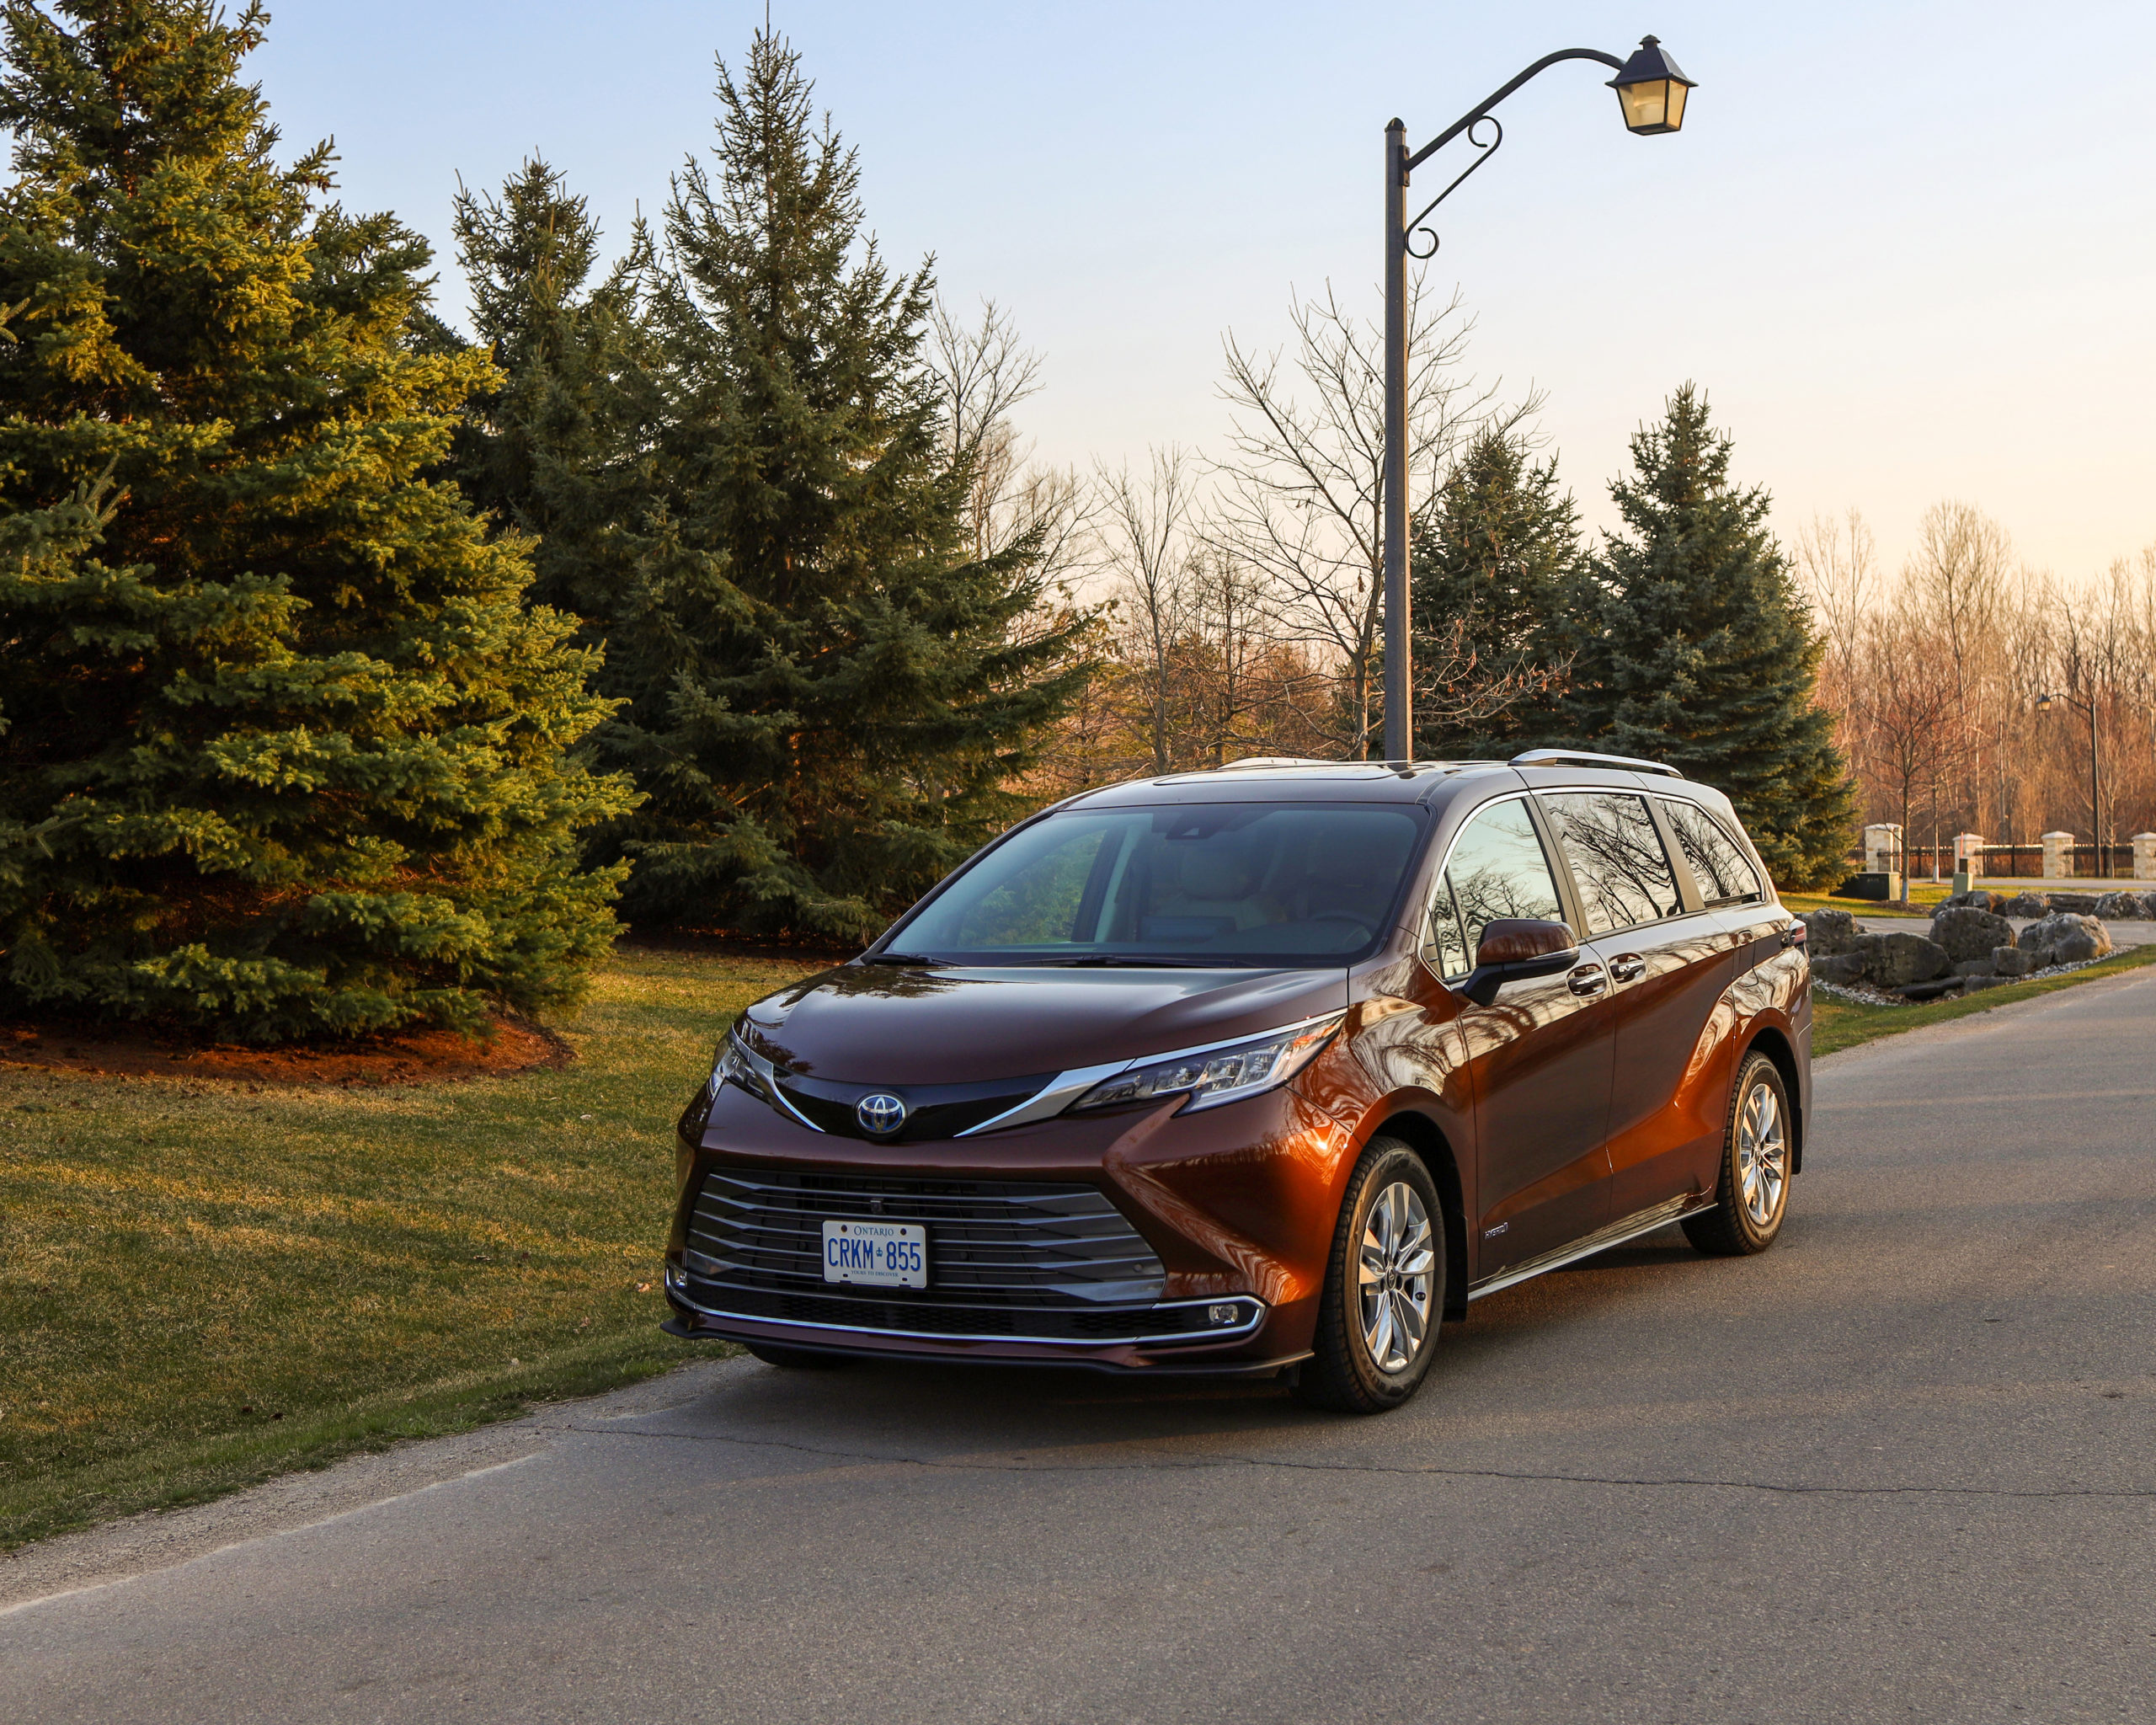 Live Your Life in Style: The All-New, All-Hybrid 2021 Toyota